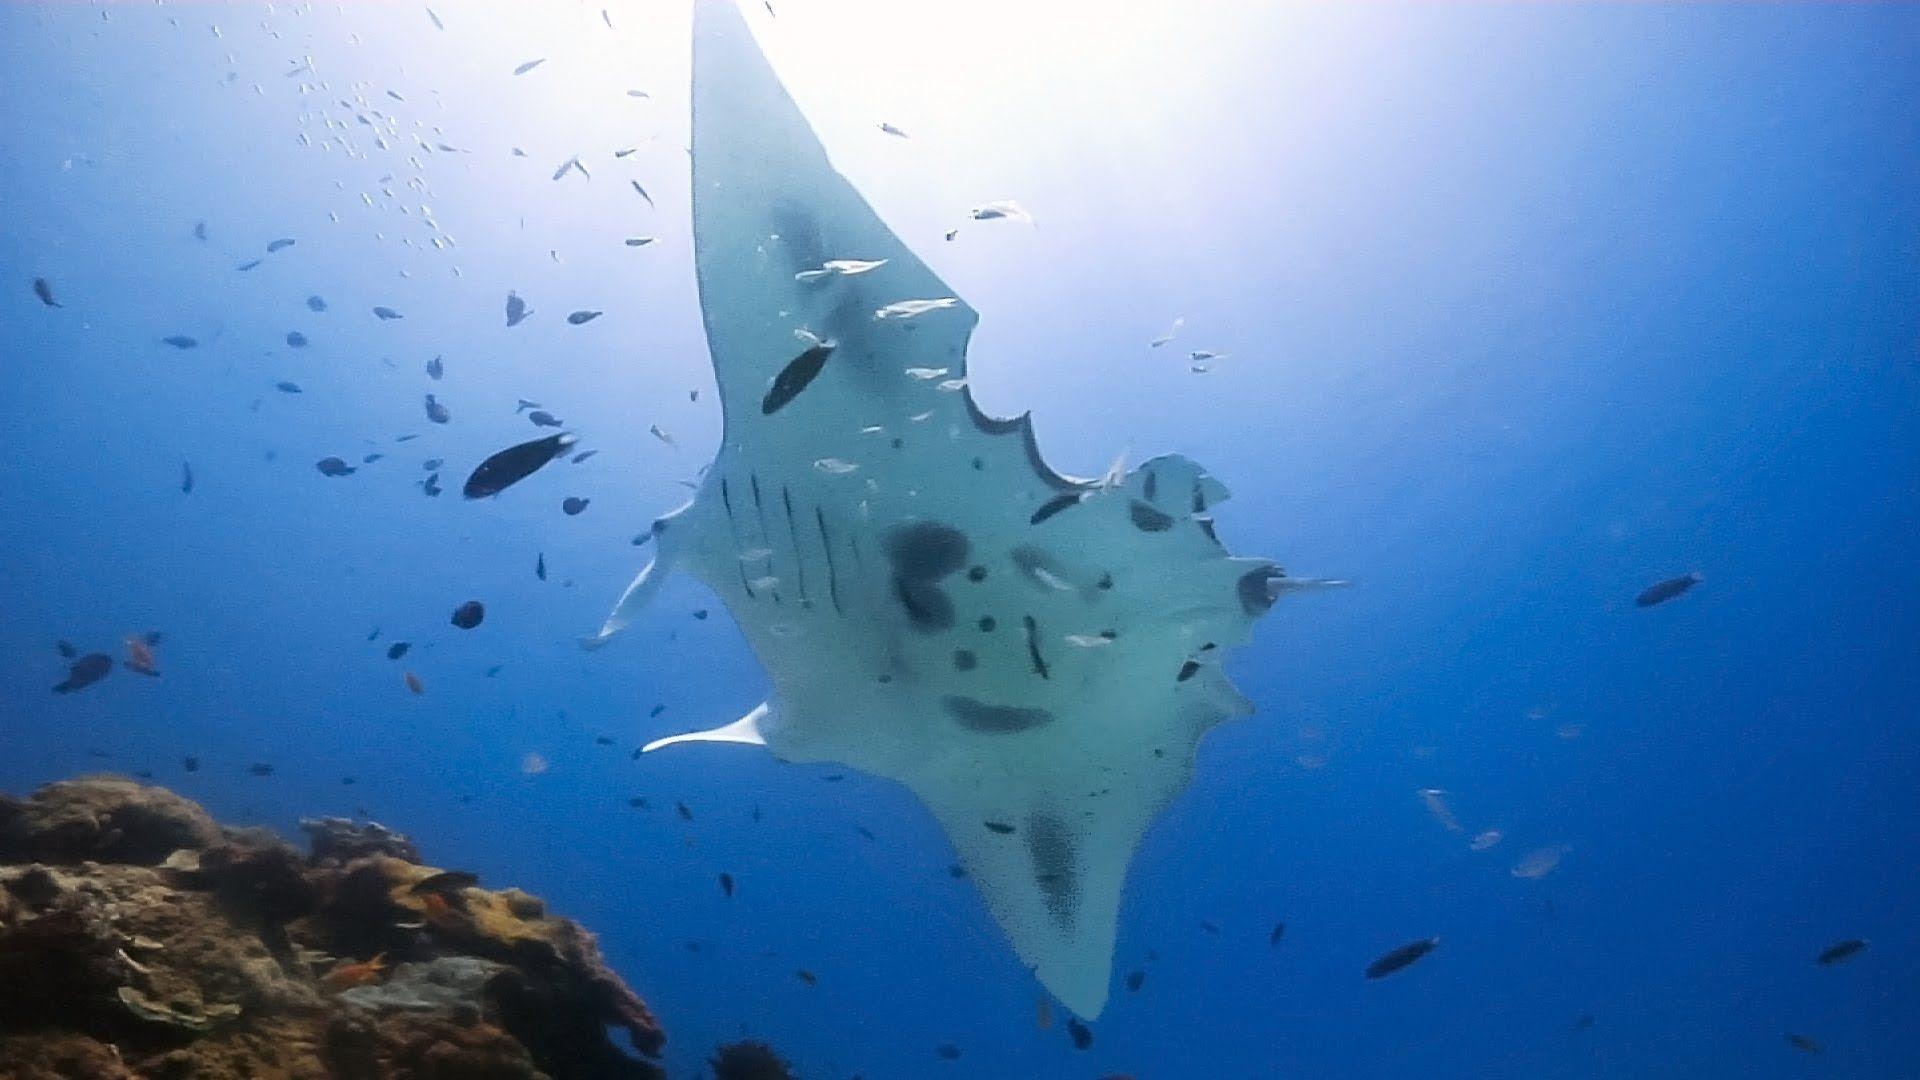 Manta ray with bite marks. I filmed it circling a cleaning station